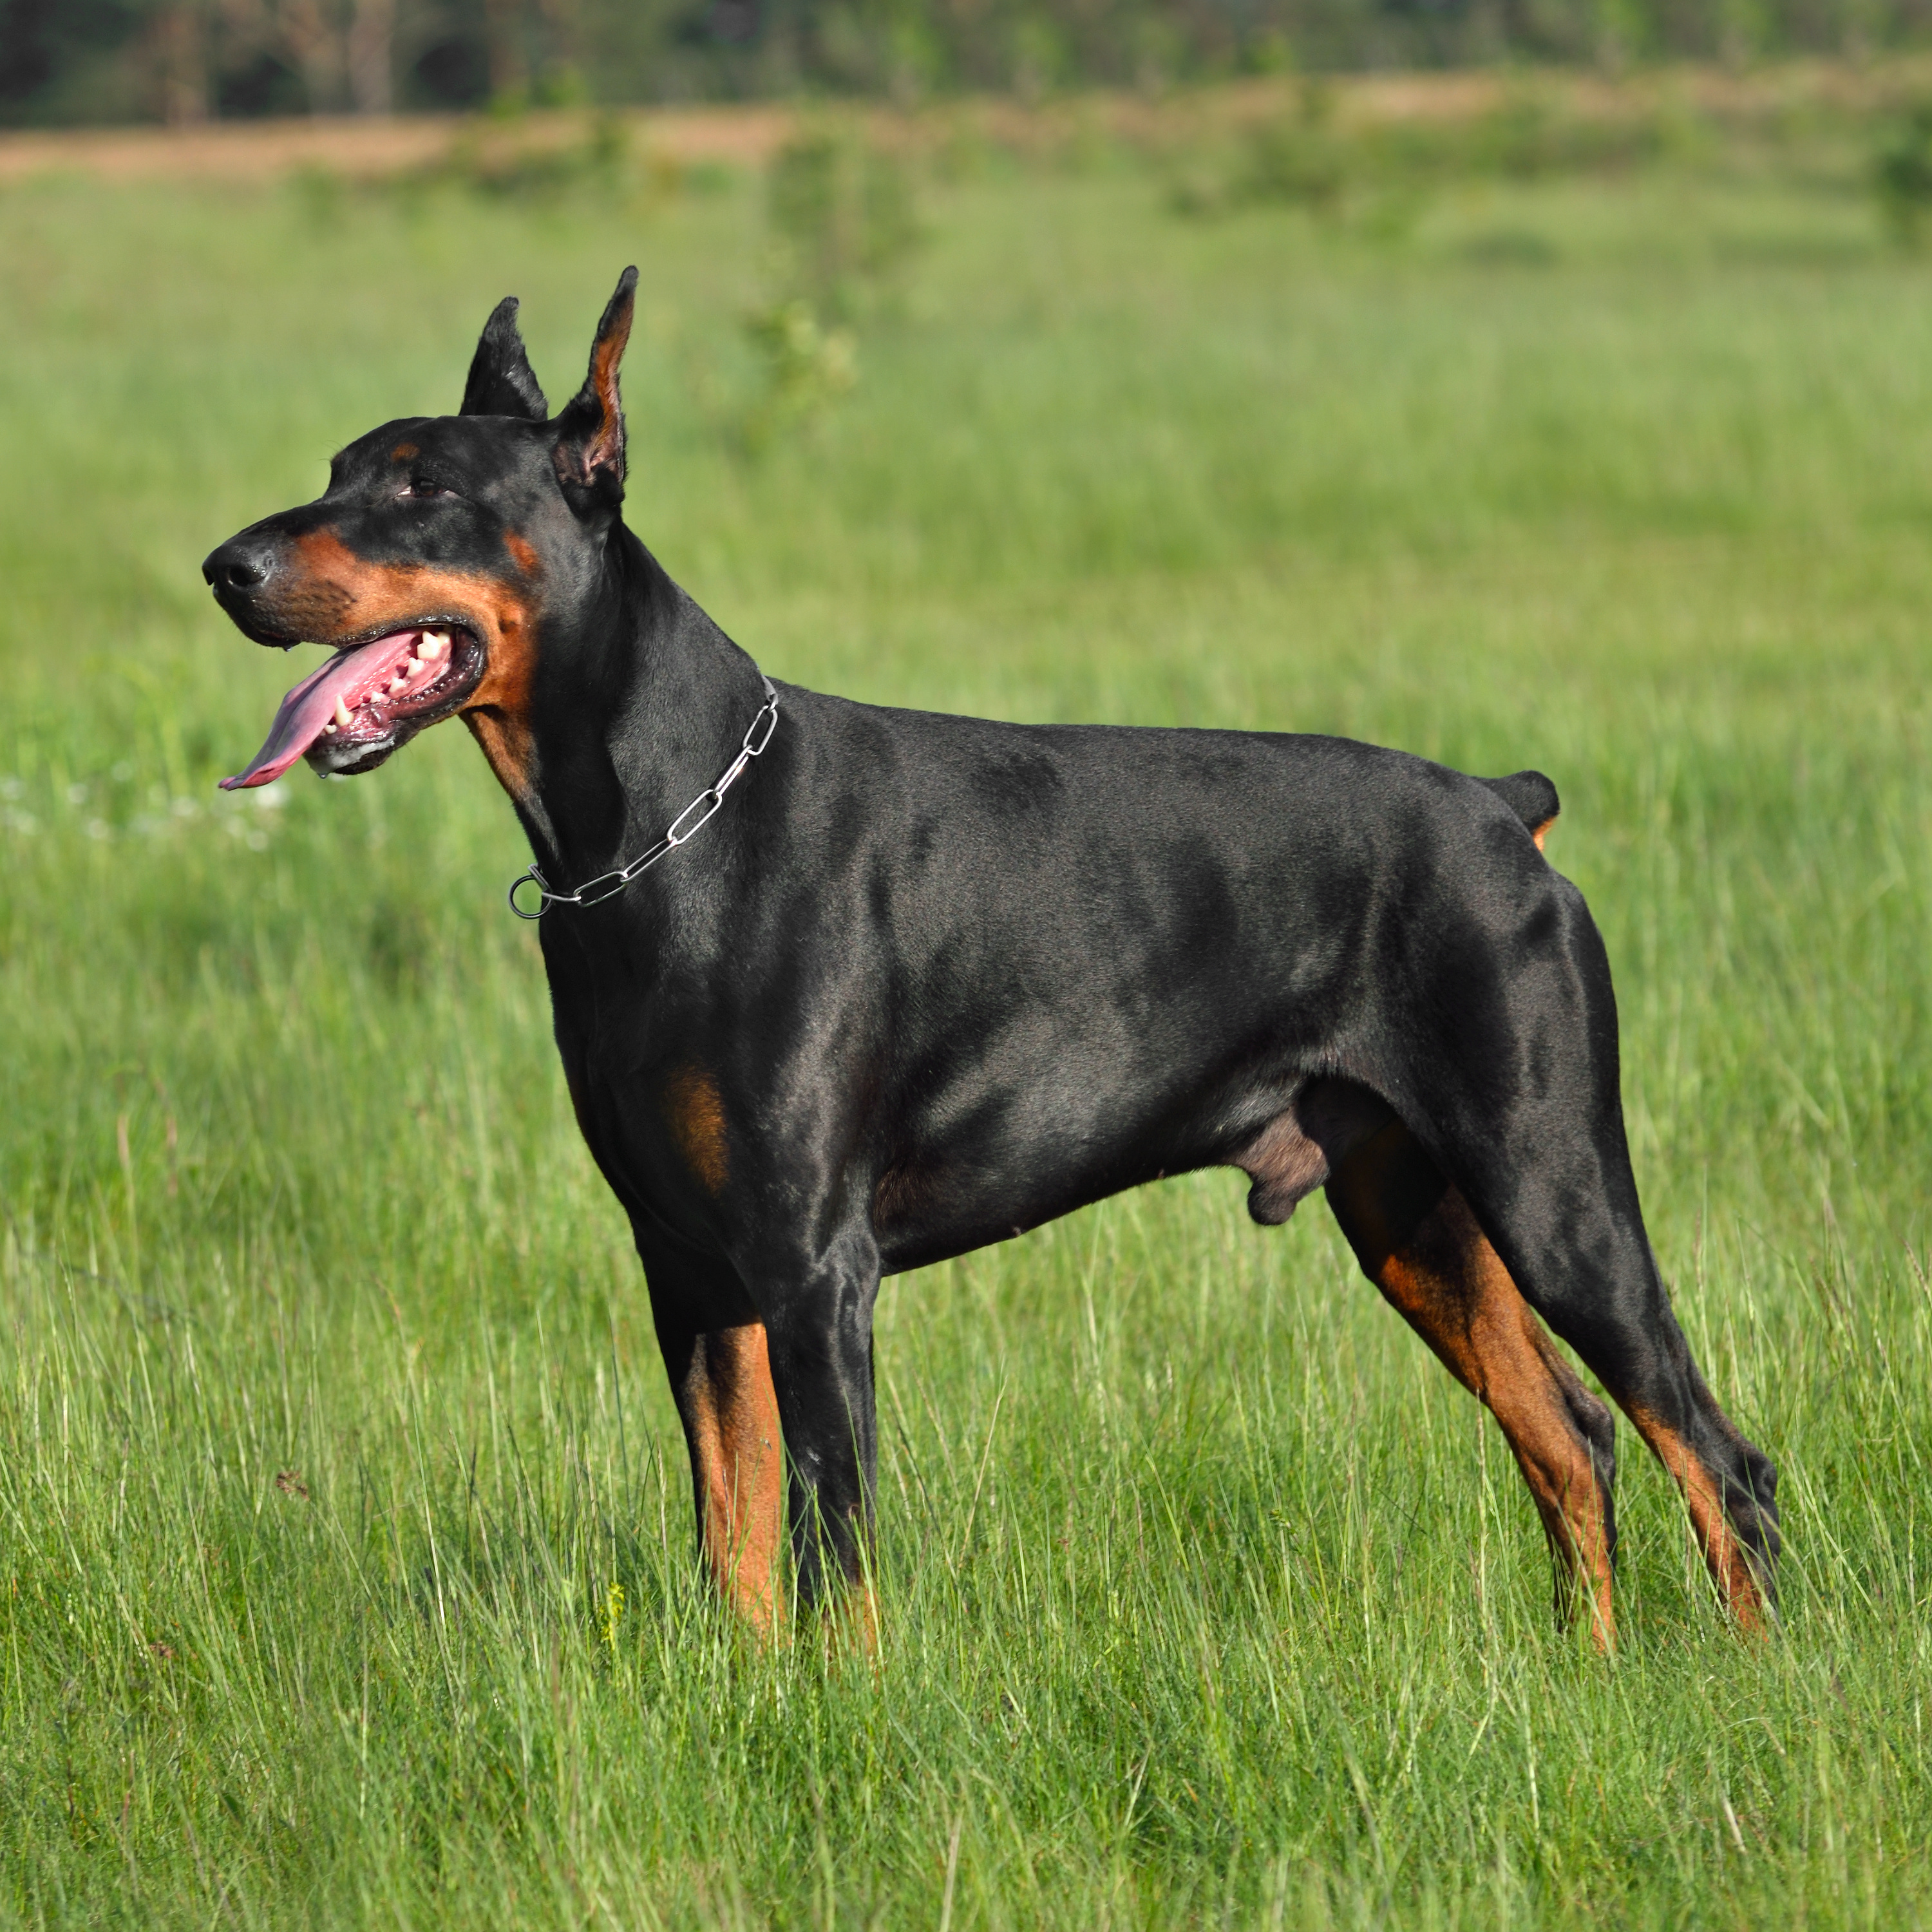 Dog Training Elite has expert Doberman training in Atlanta, GA
																															 that are experienced in a variety of positive training methods for Dobermans.